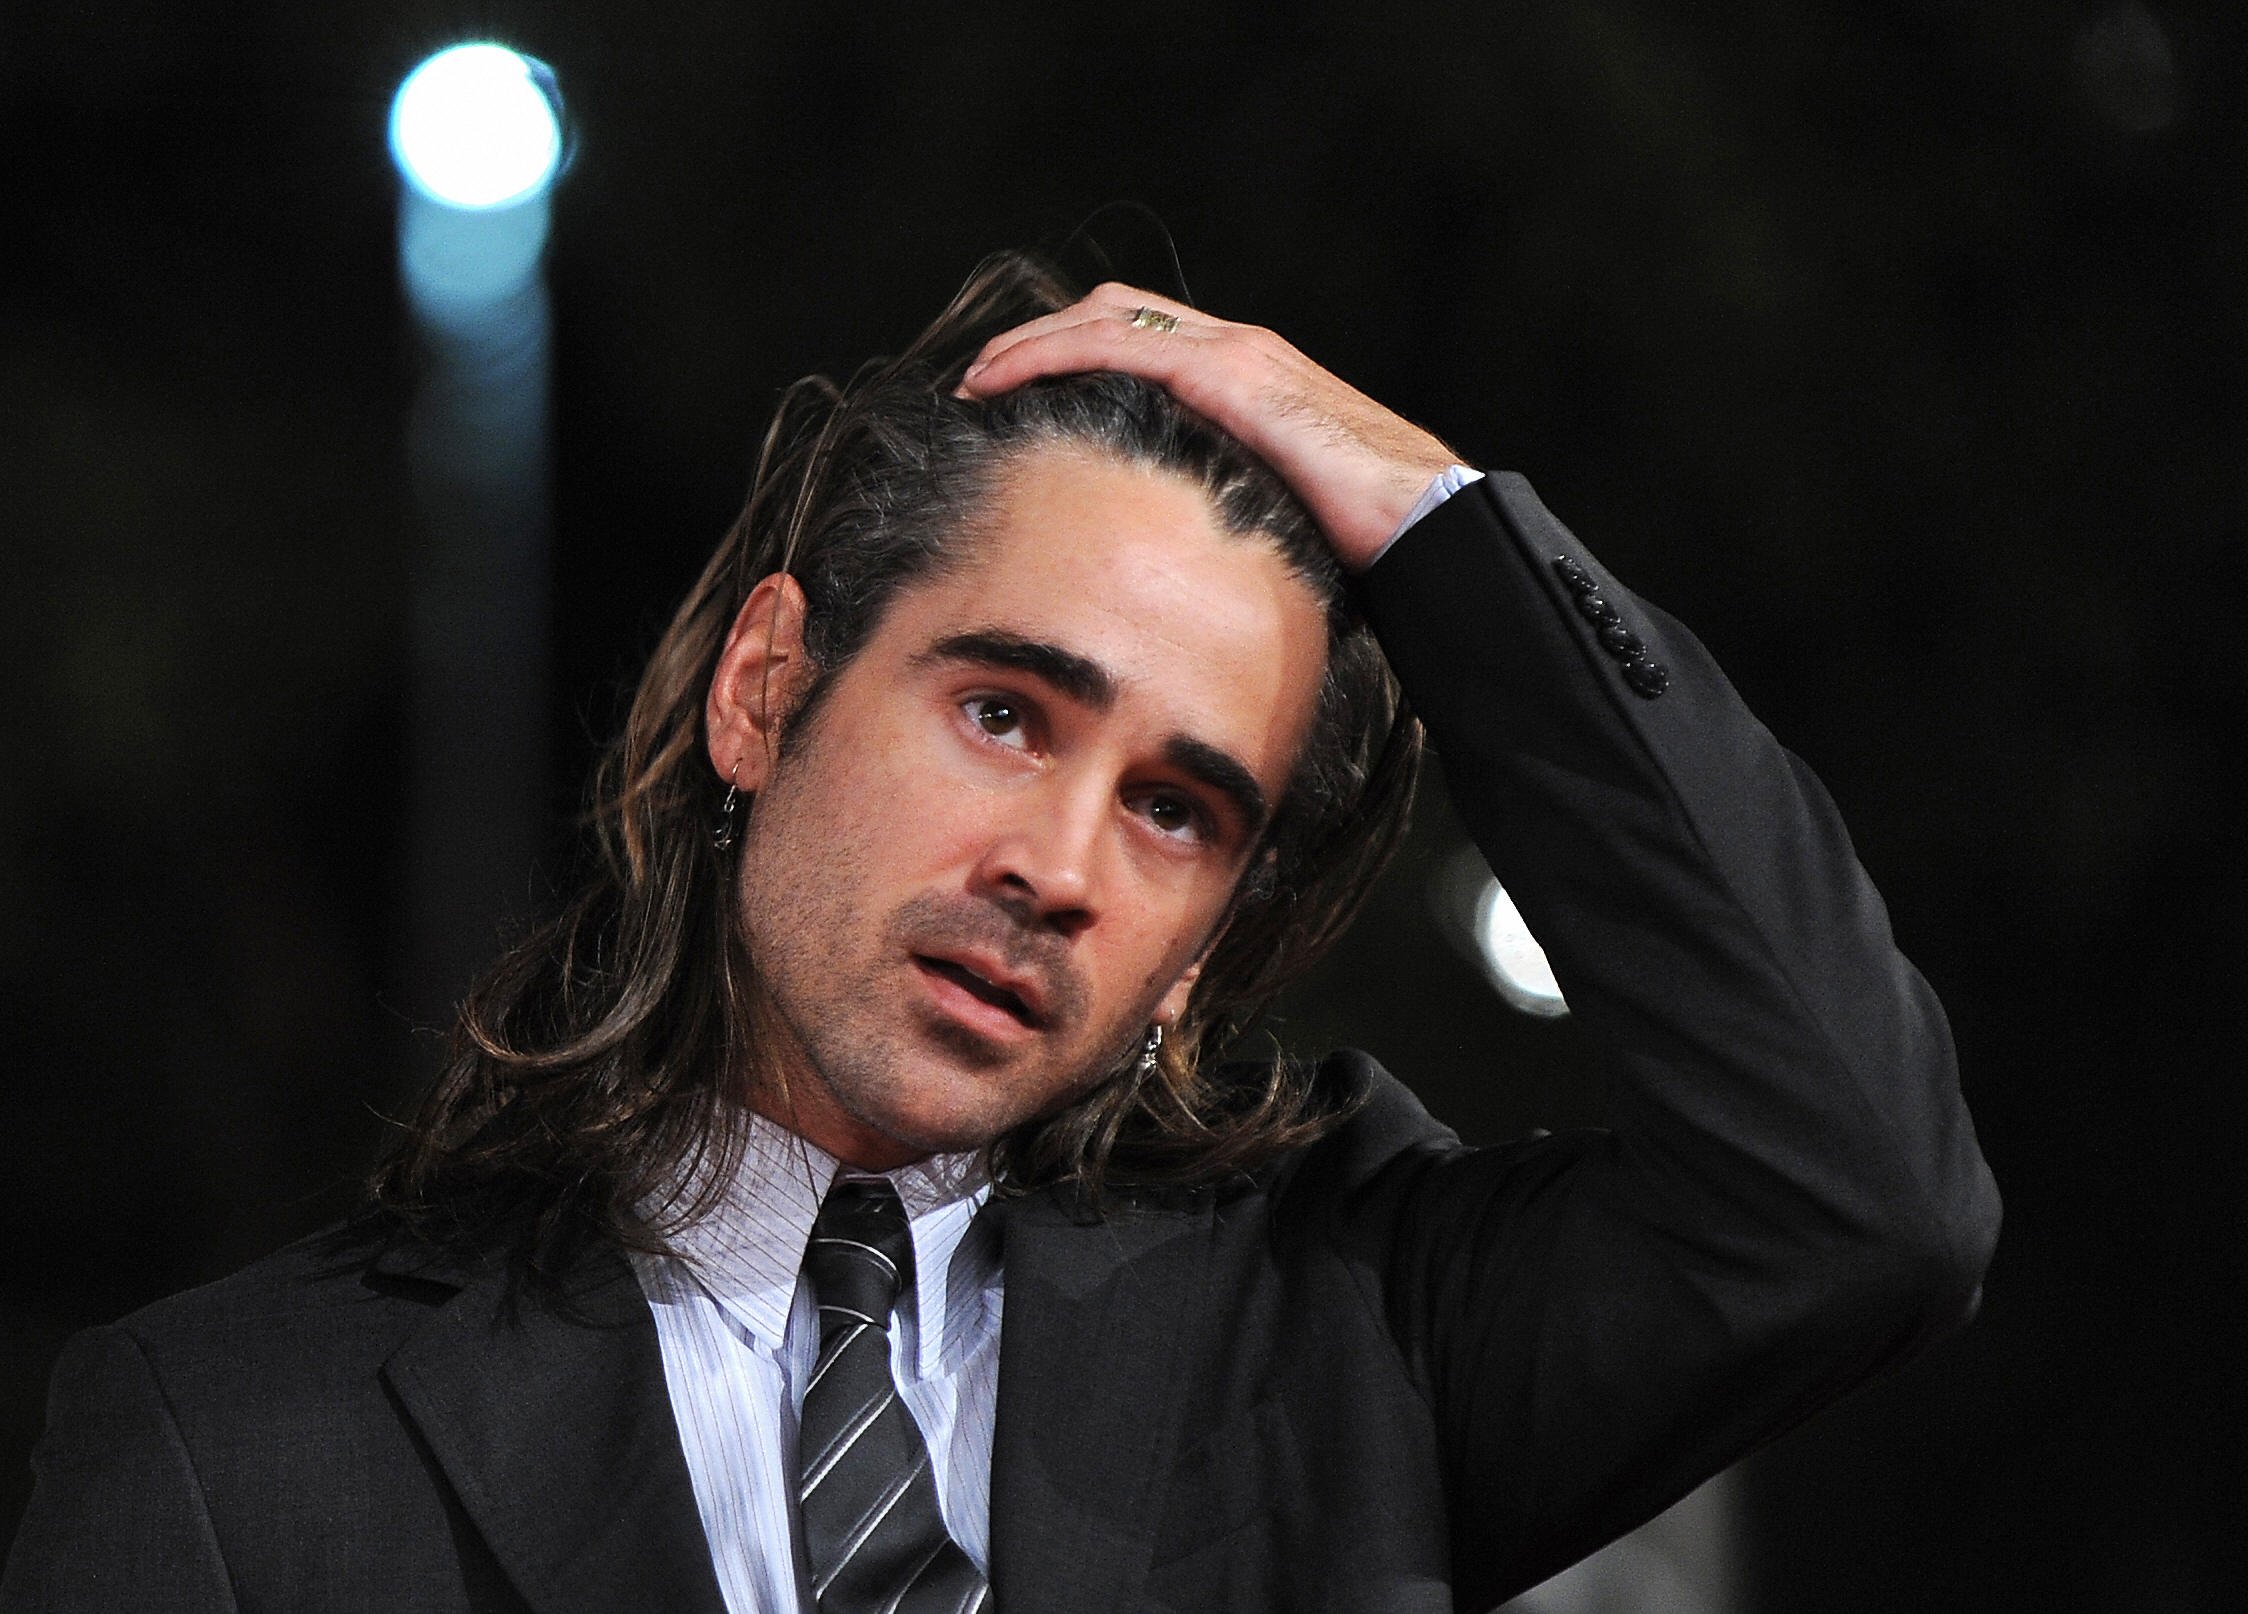 Irish actor Colin Farrell poses on the red carpet as he arrives to present the movie "Pride and Glory" on October 28, 2008, at Rome's Film Festival 2008 | Source: Getty Images